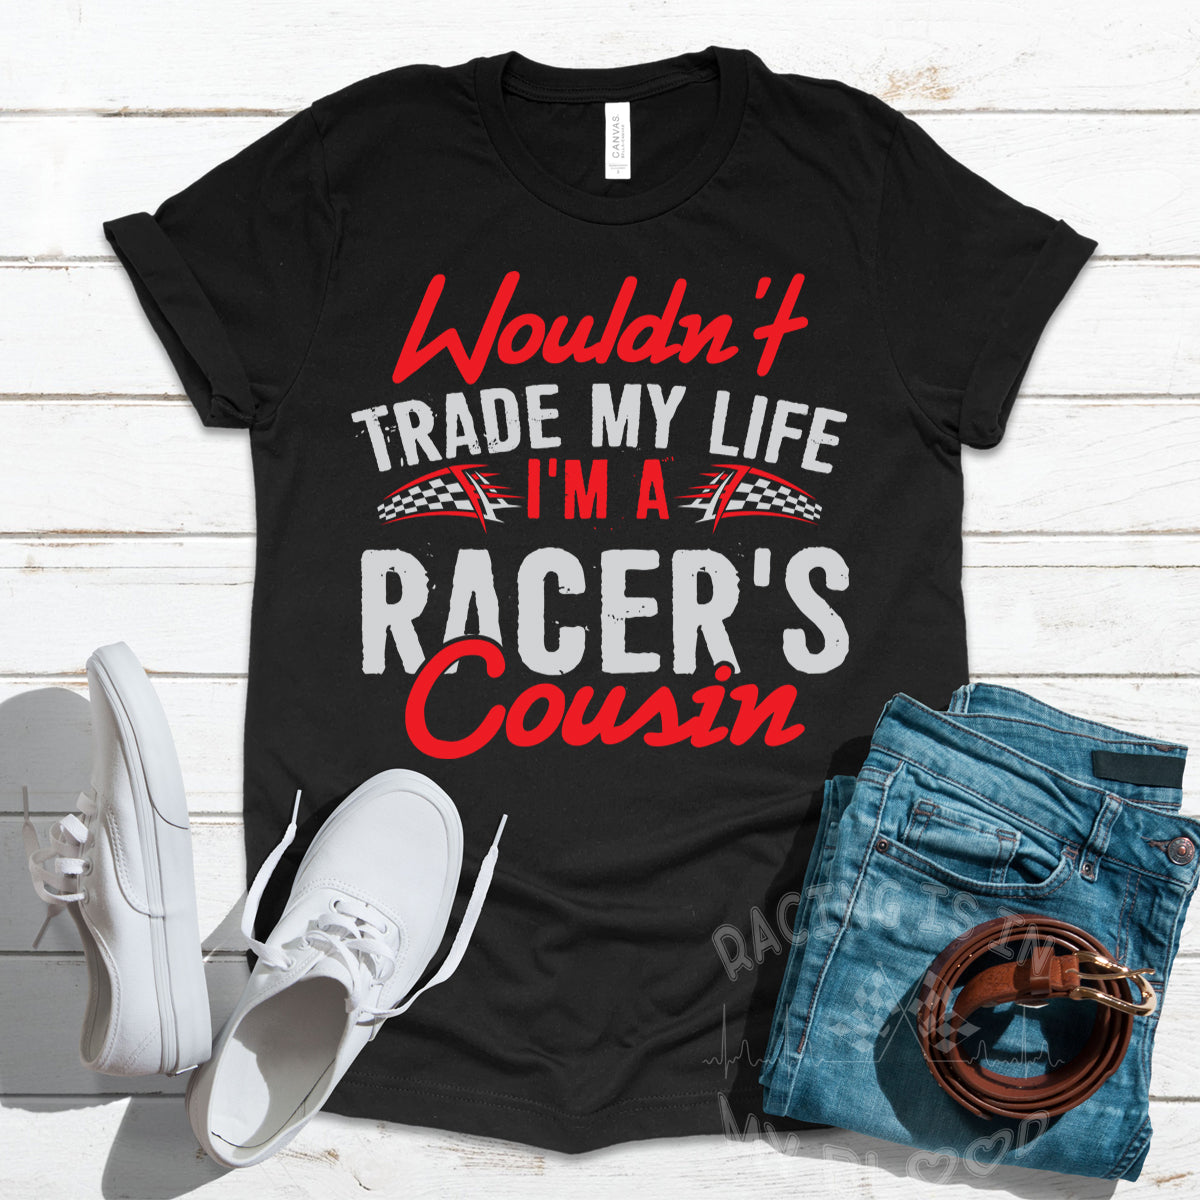 Wouldn't Trade My Life I'm A Racer's Cousin T-Shirts!